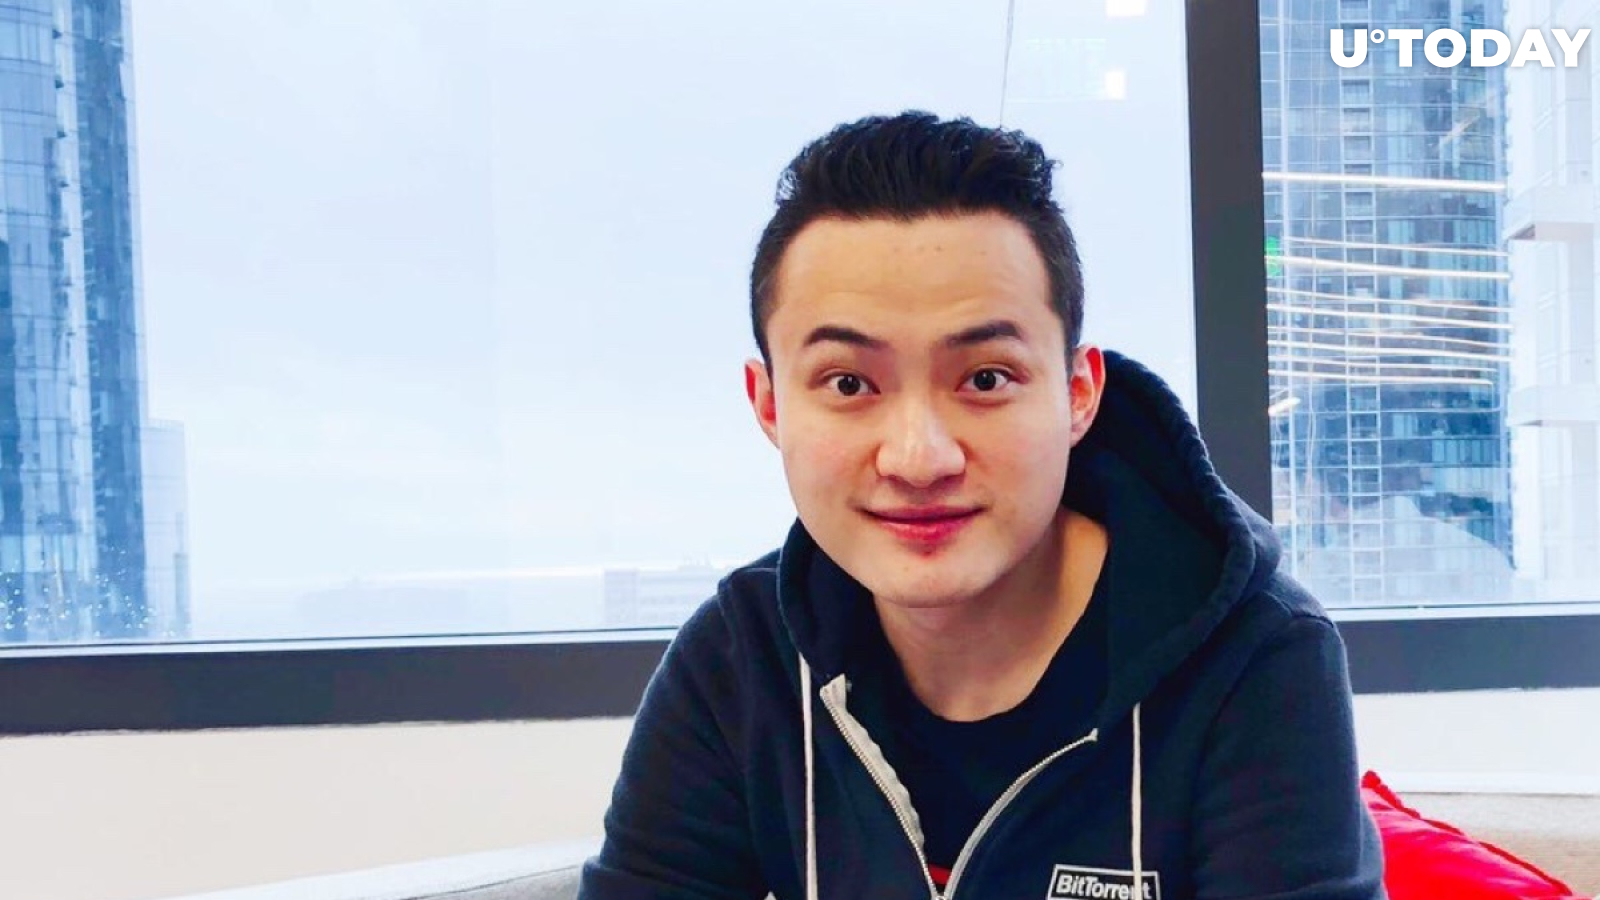 Justin Sun Announces Tron (TRX) Return to Top 10, Promises BTT will Be Close Soon Too